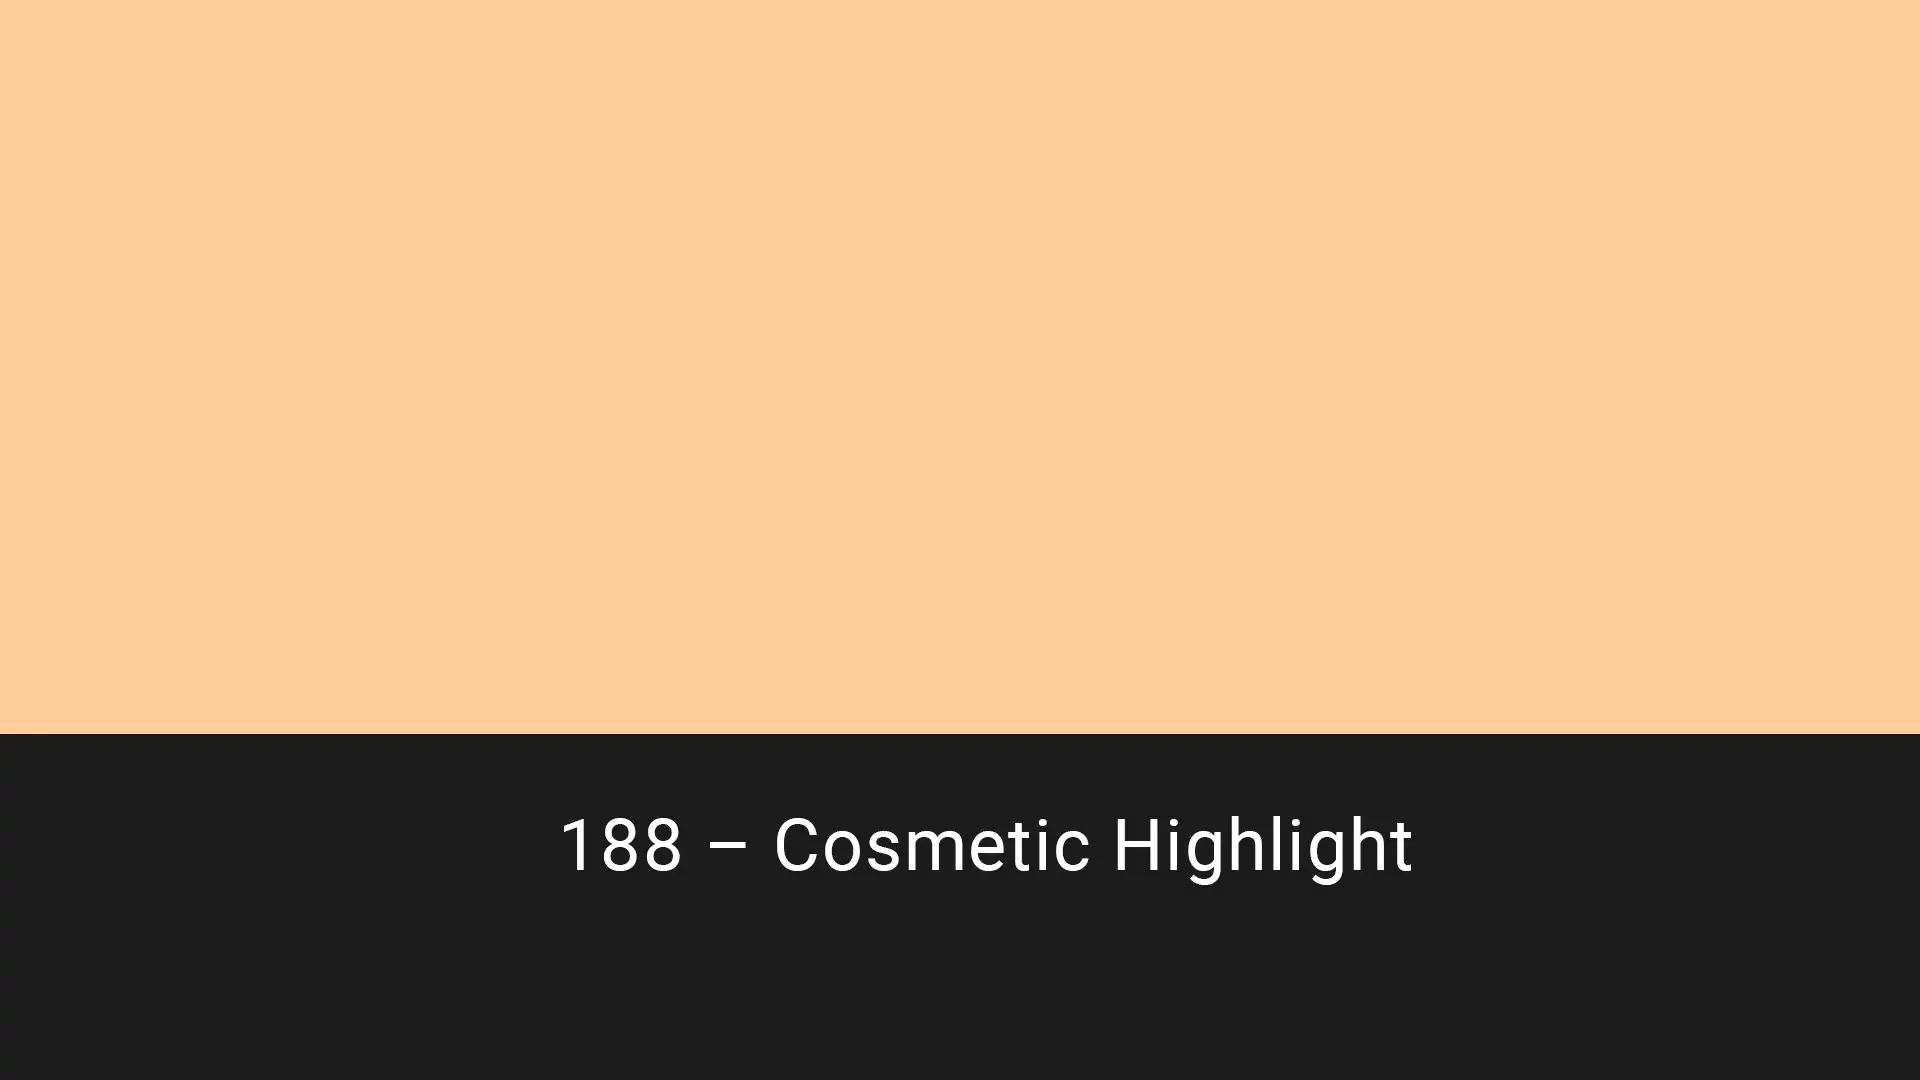 Cotech filters 188 Cosmetic Highlight